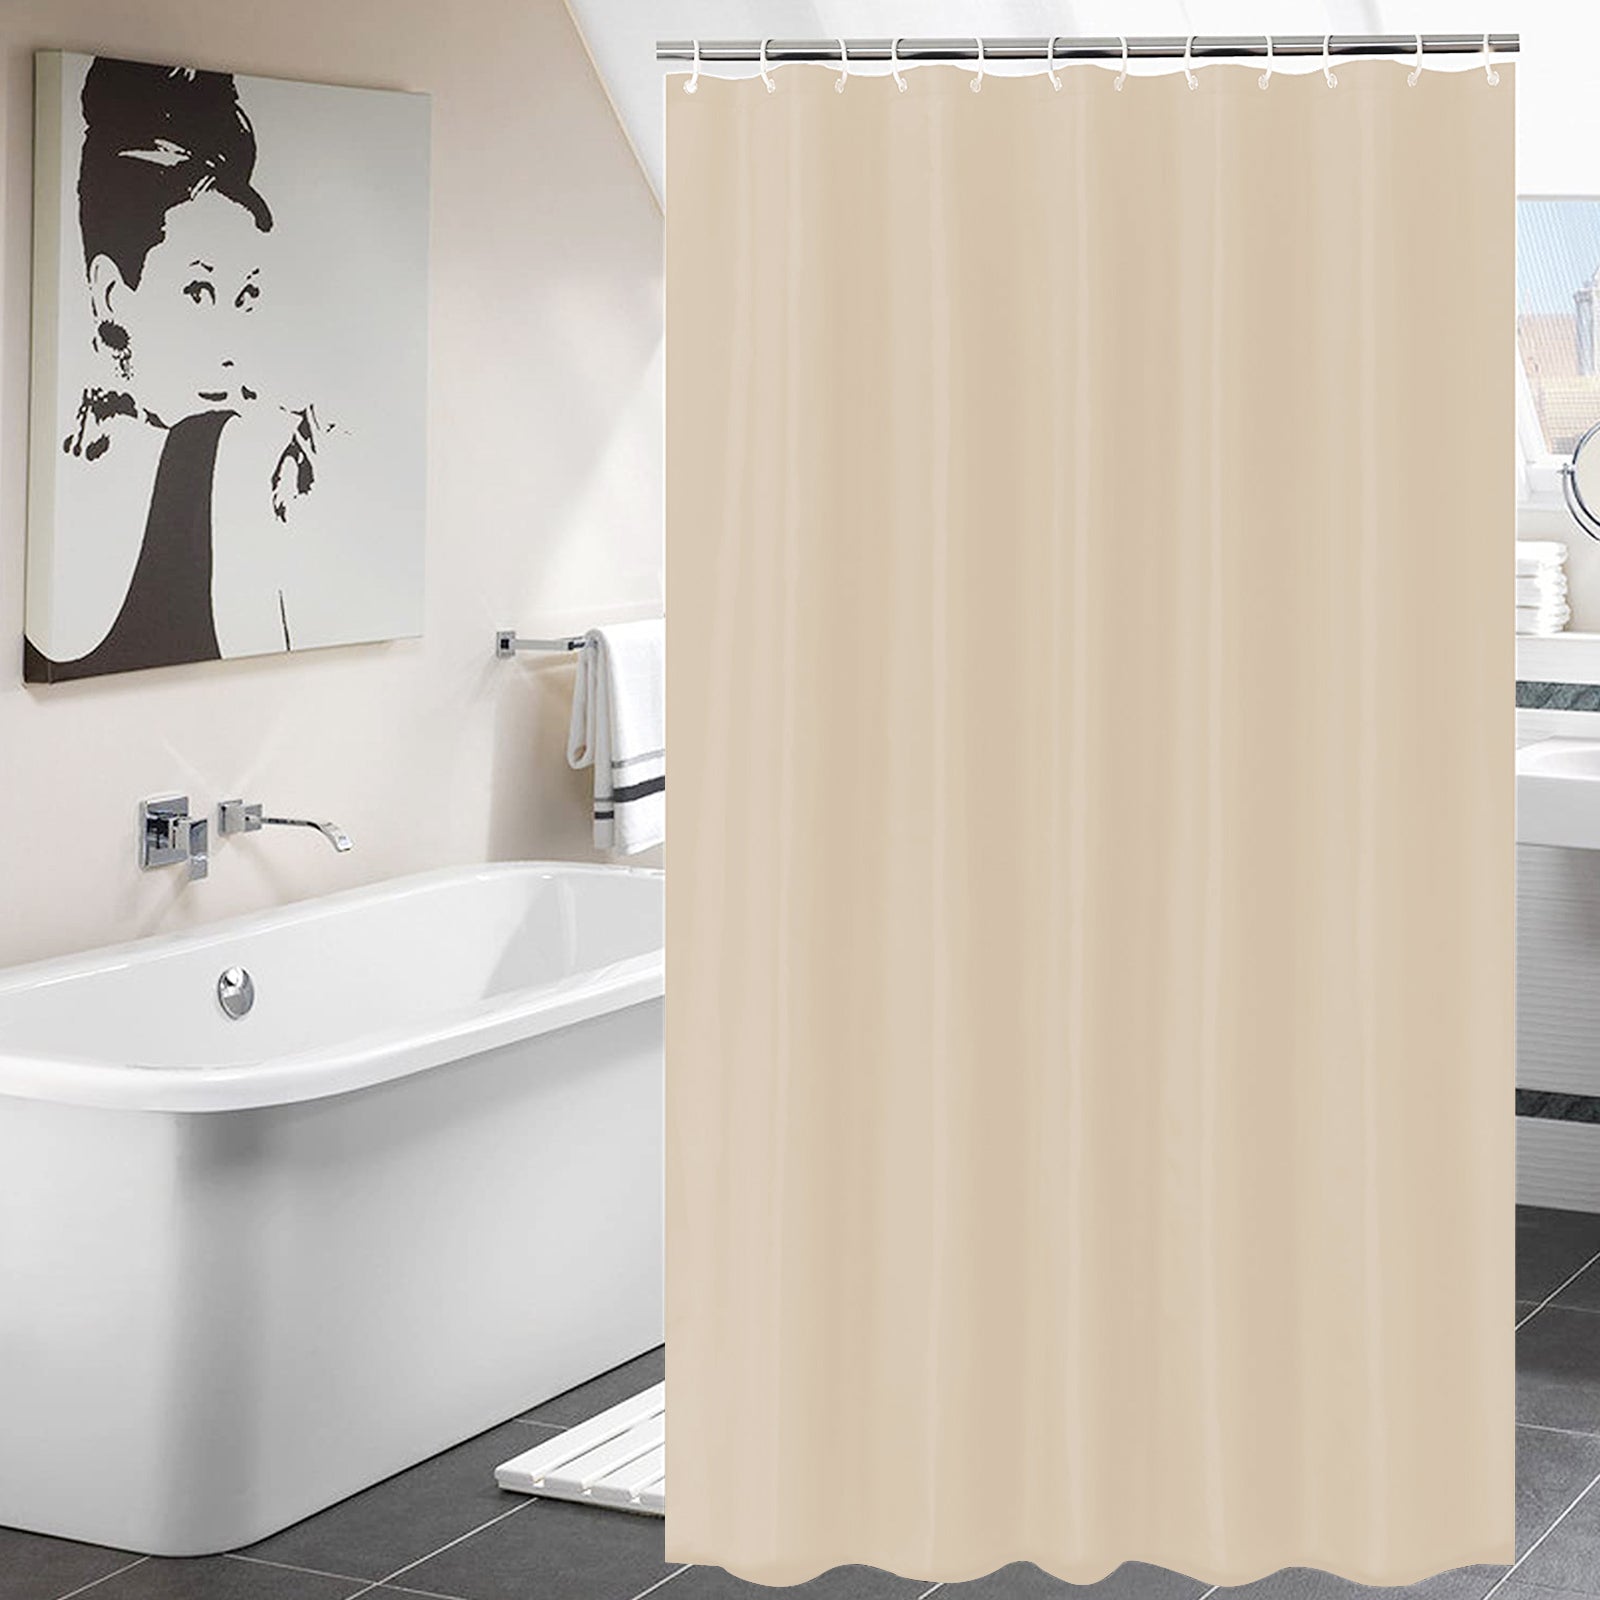 Akarise Fabric Shower Curtain with Rust-Resistant Metal Grommets